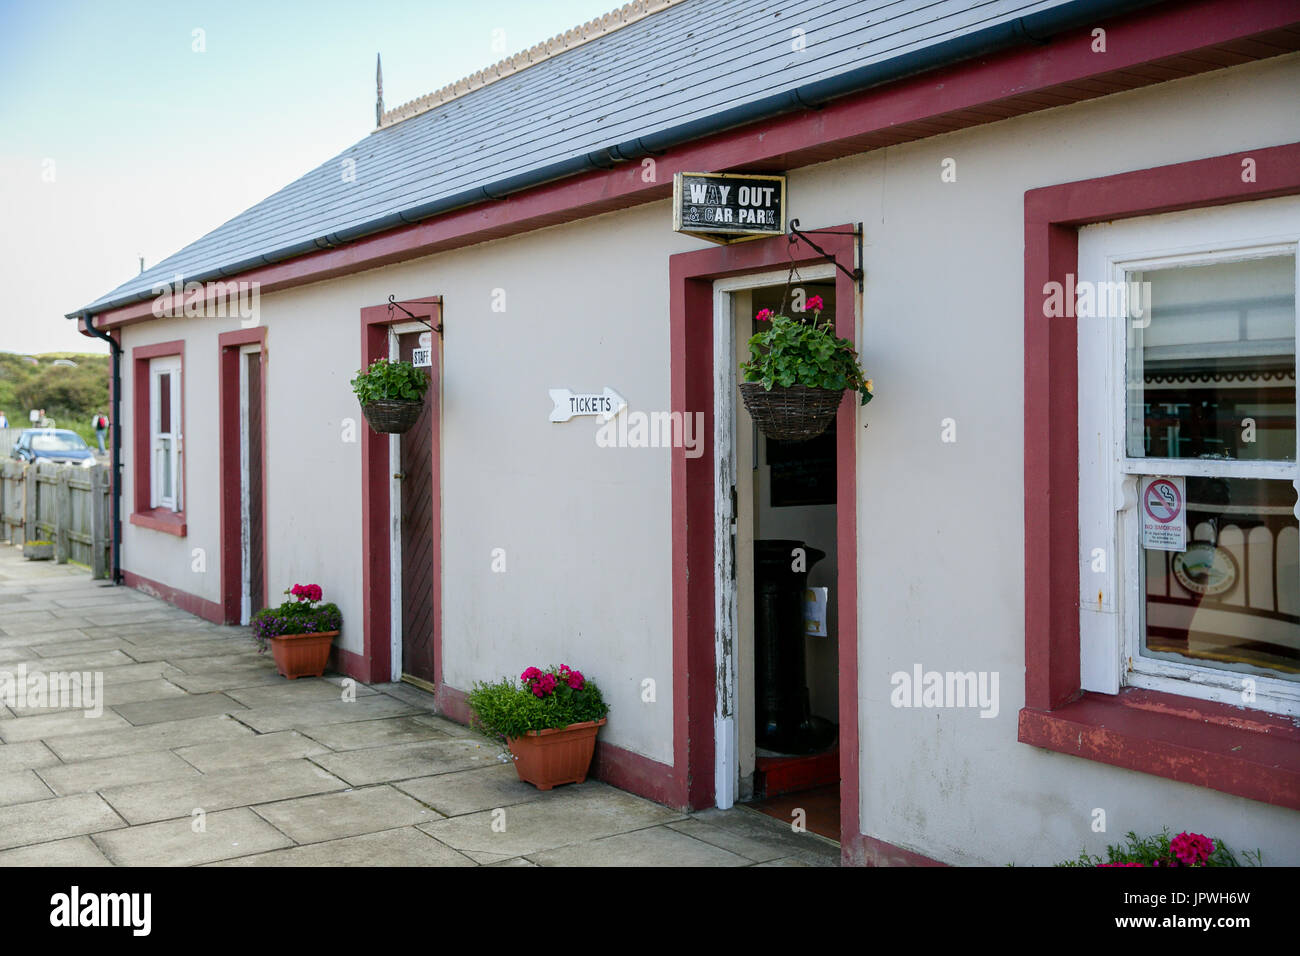 Entrance to old train station building at the Giant's Causeway & Bushmills Railway Station Antrim Northern Ireland Stock Photo